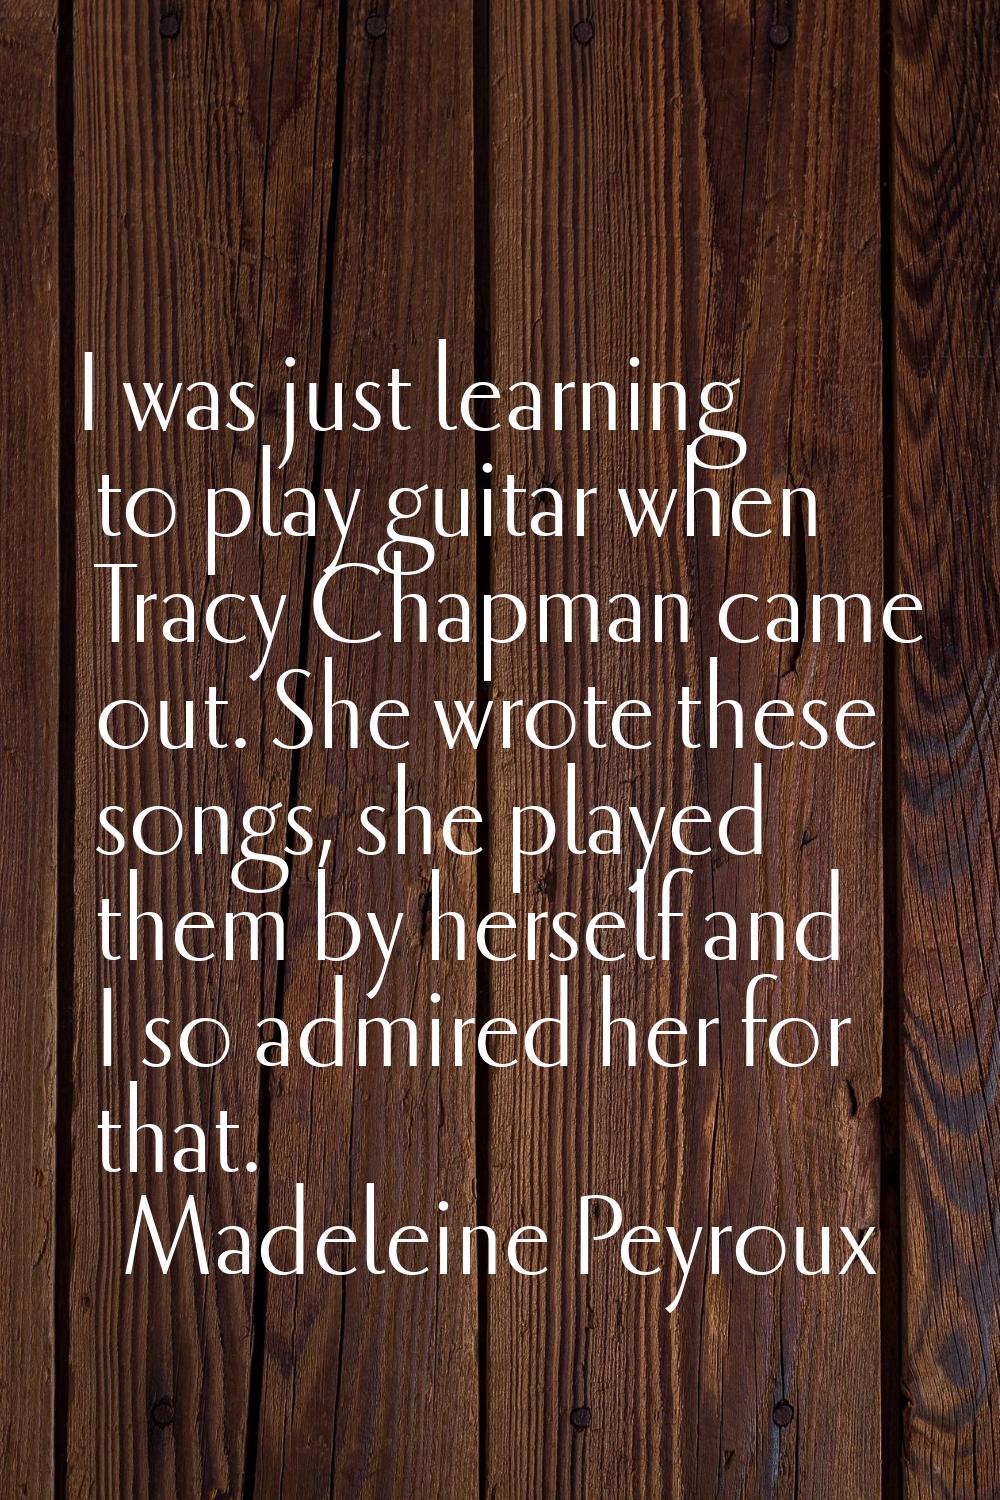 I was just learning to play guitar when Tracy Chapman came out. She wrote these songs, she played t